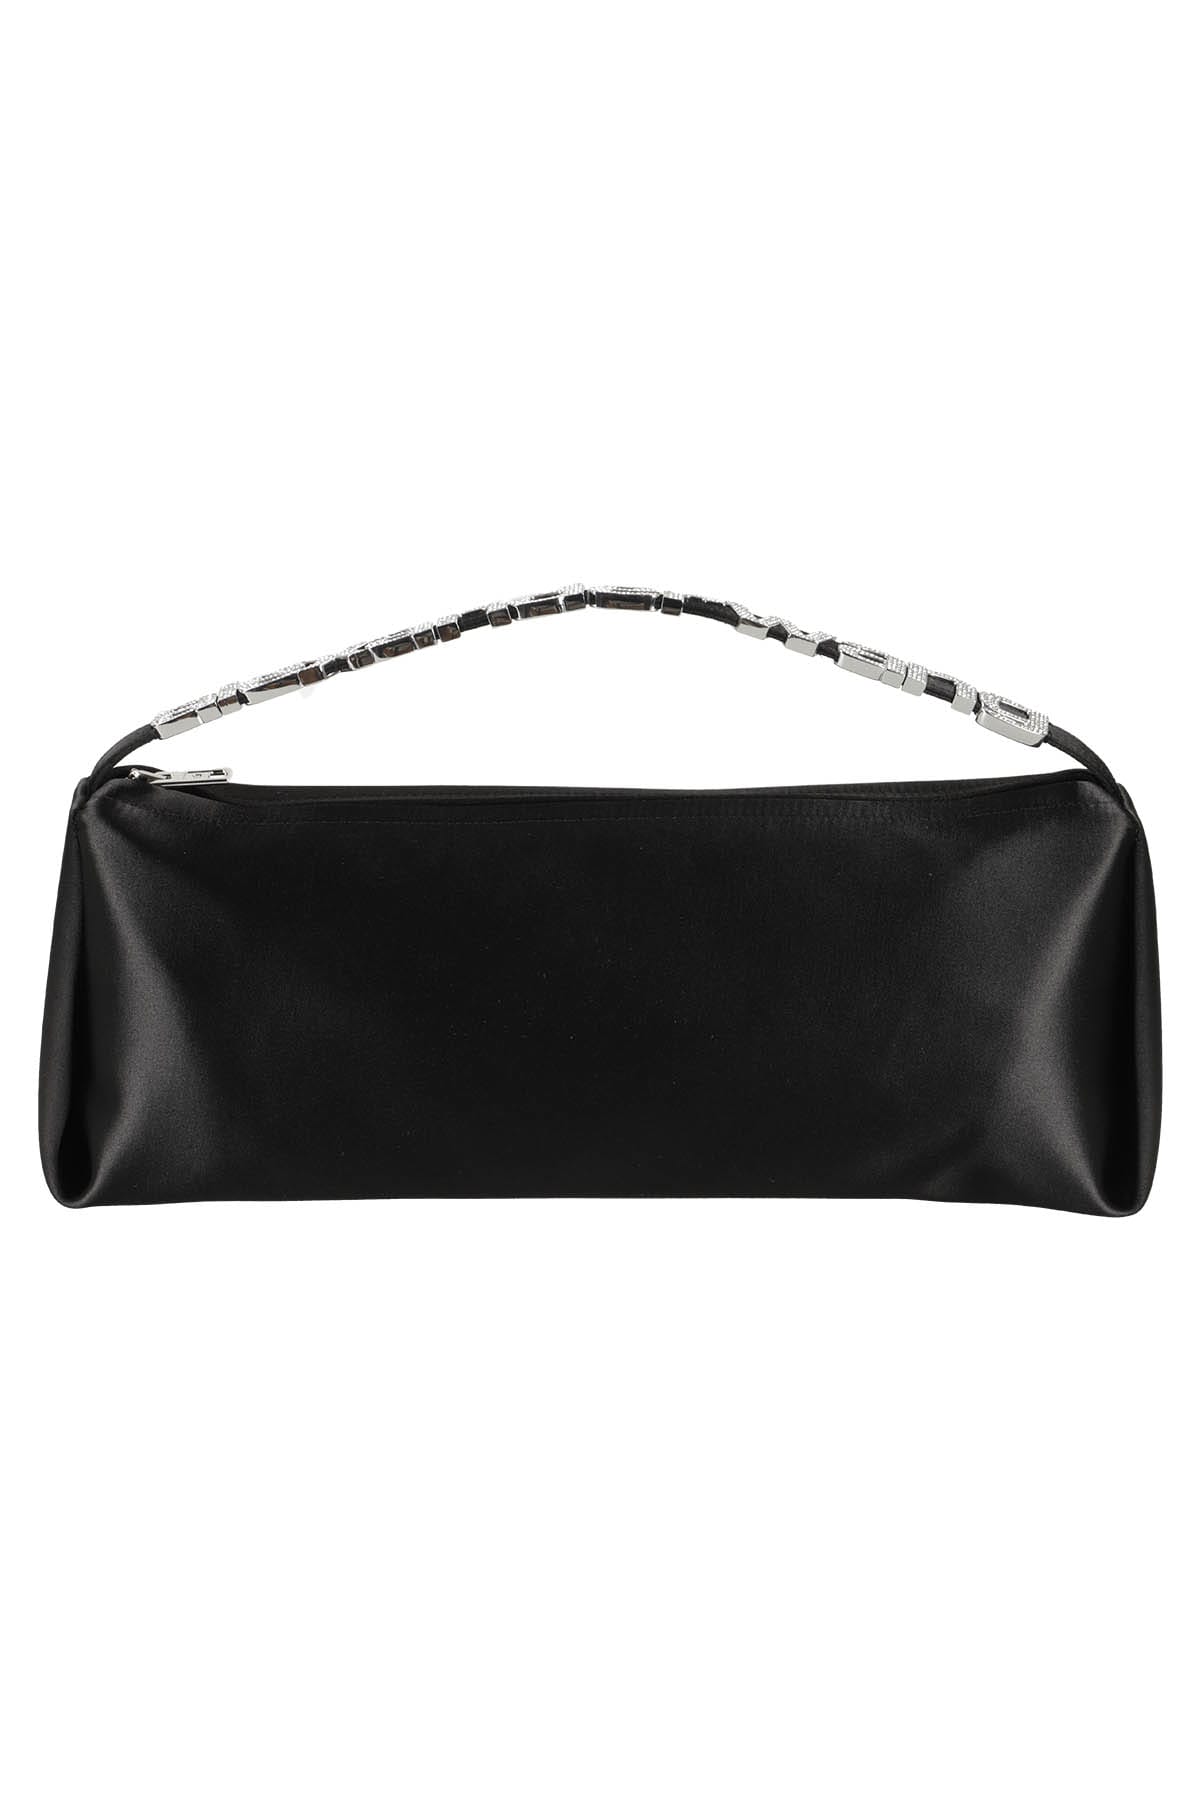 Alexander Wang Marquess Large Stretched Bag